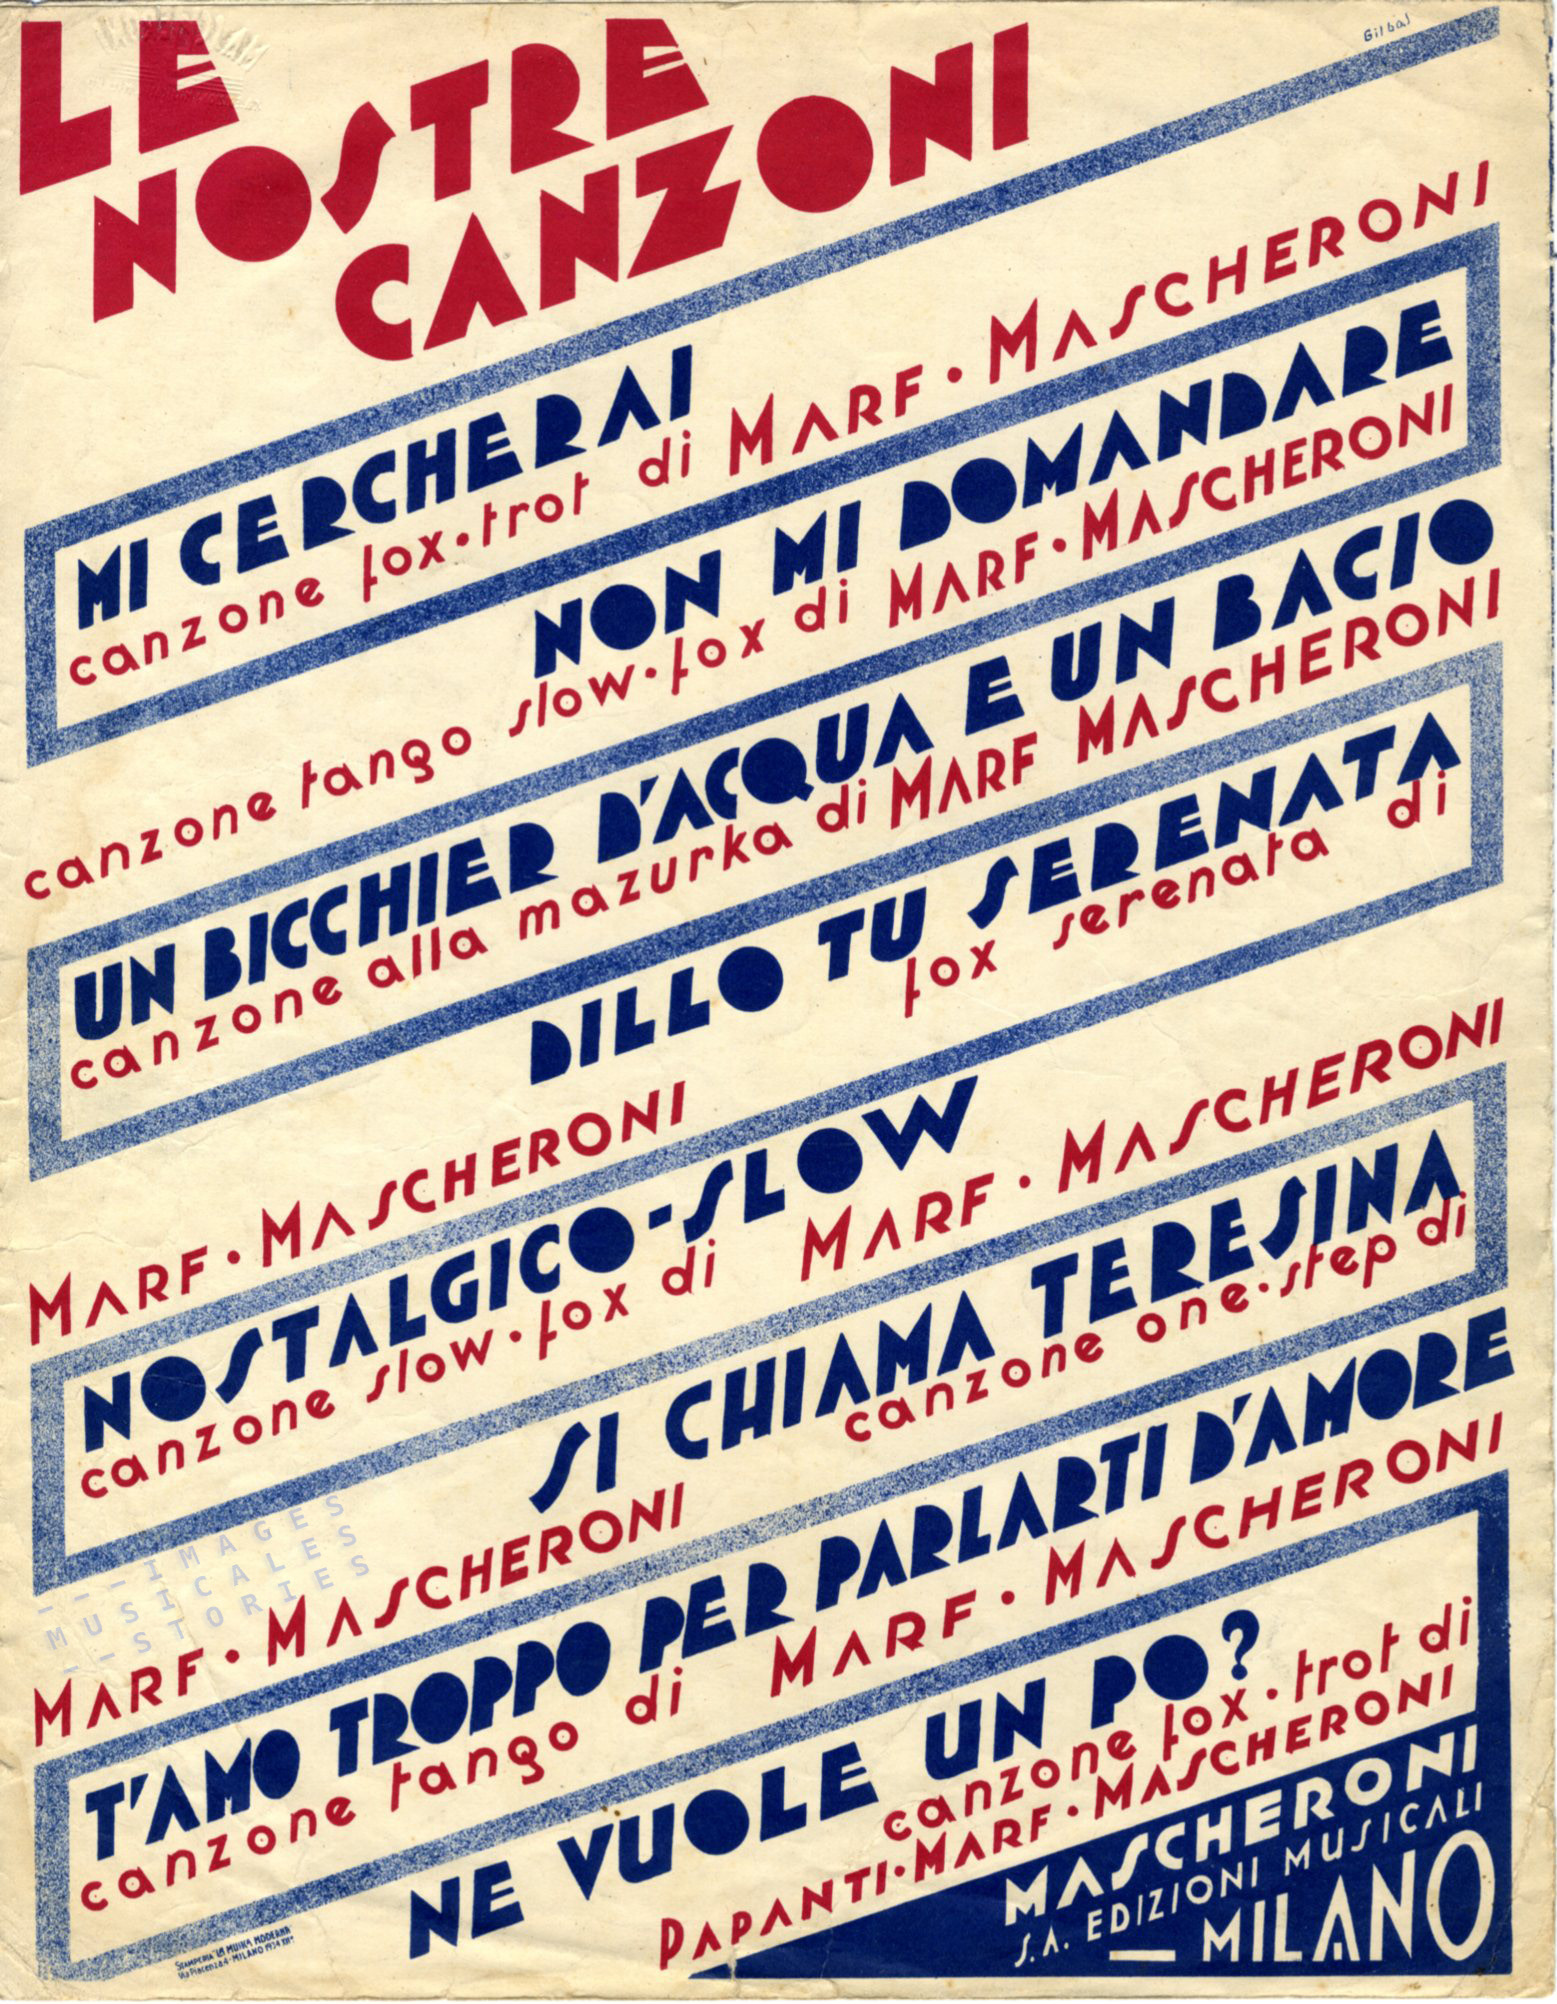 Catalog publicity for publisher Mascheroni. Illustrated by Gilbàs